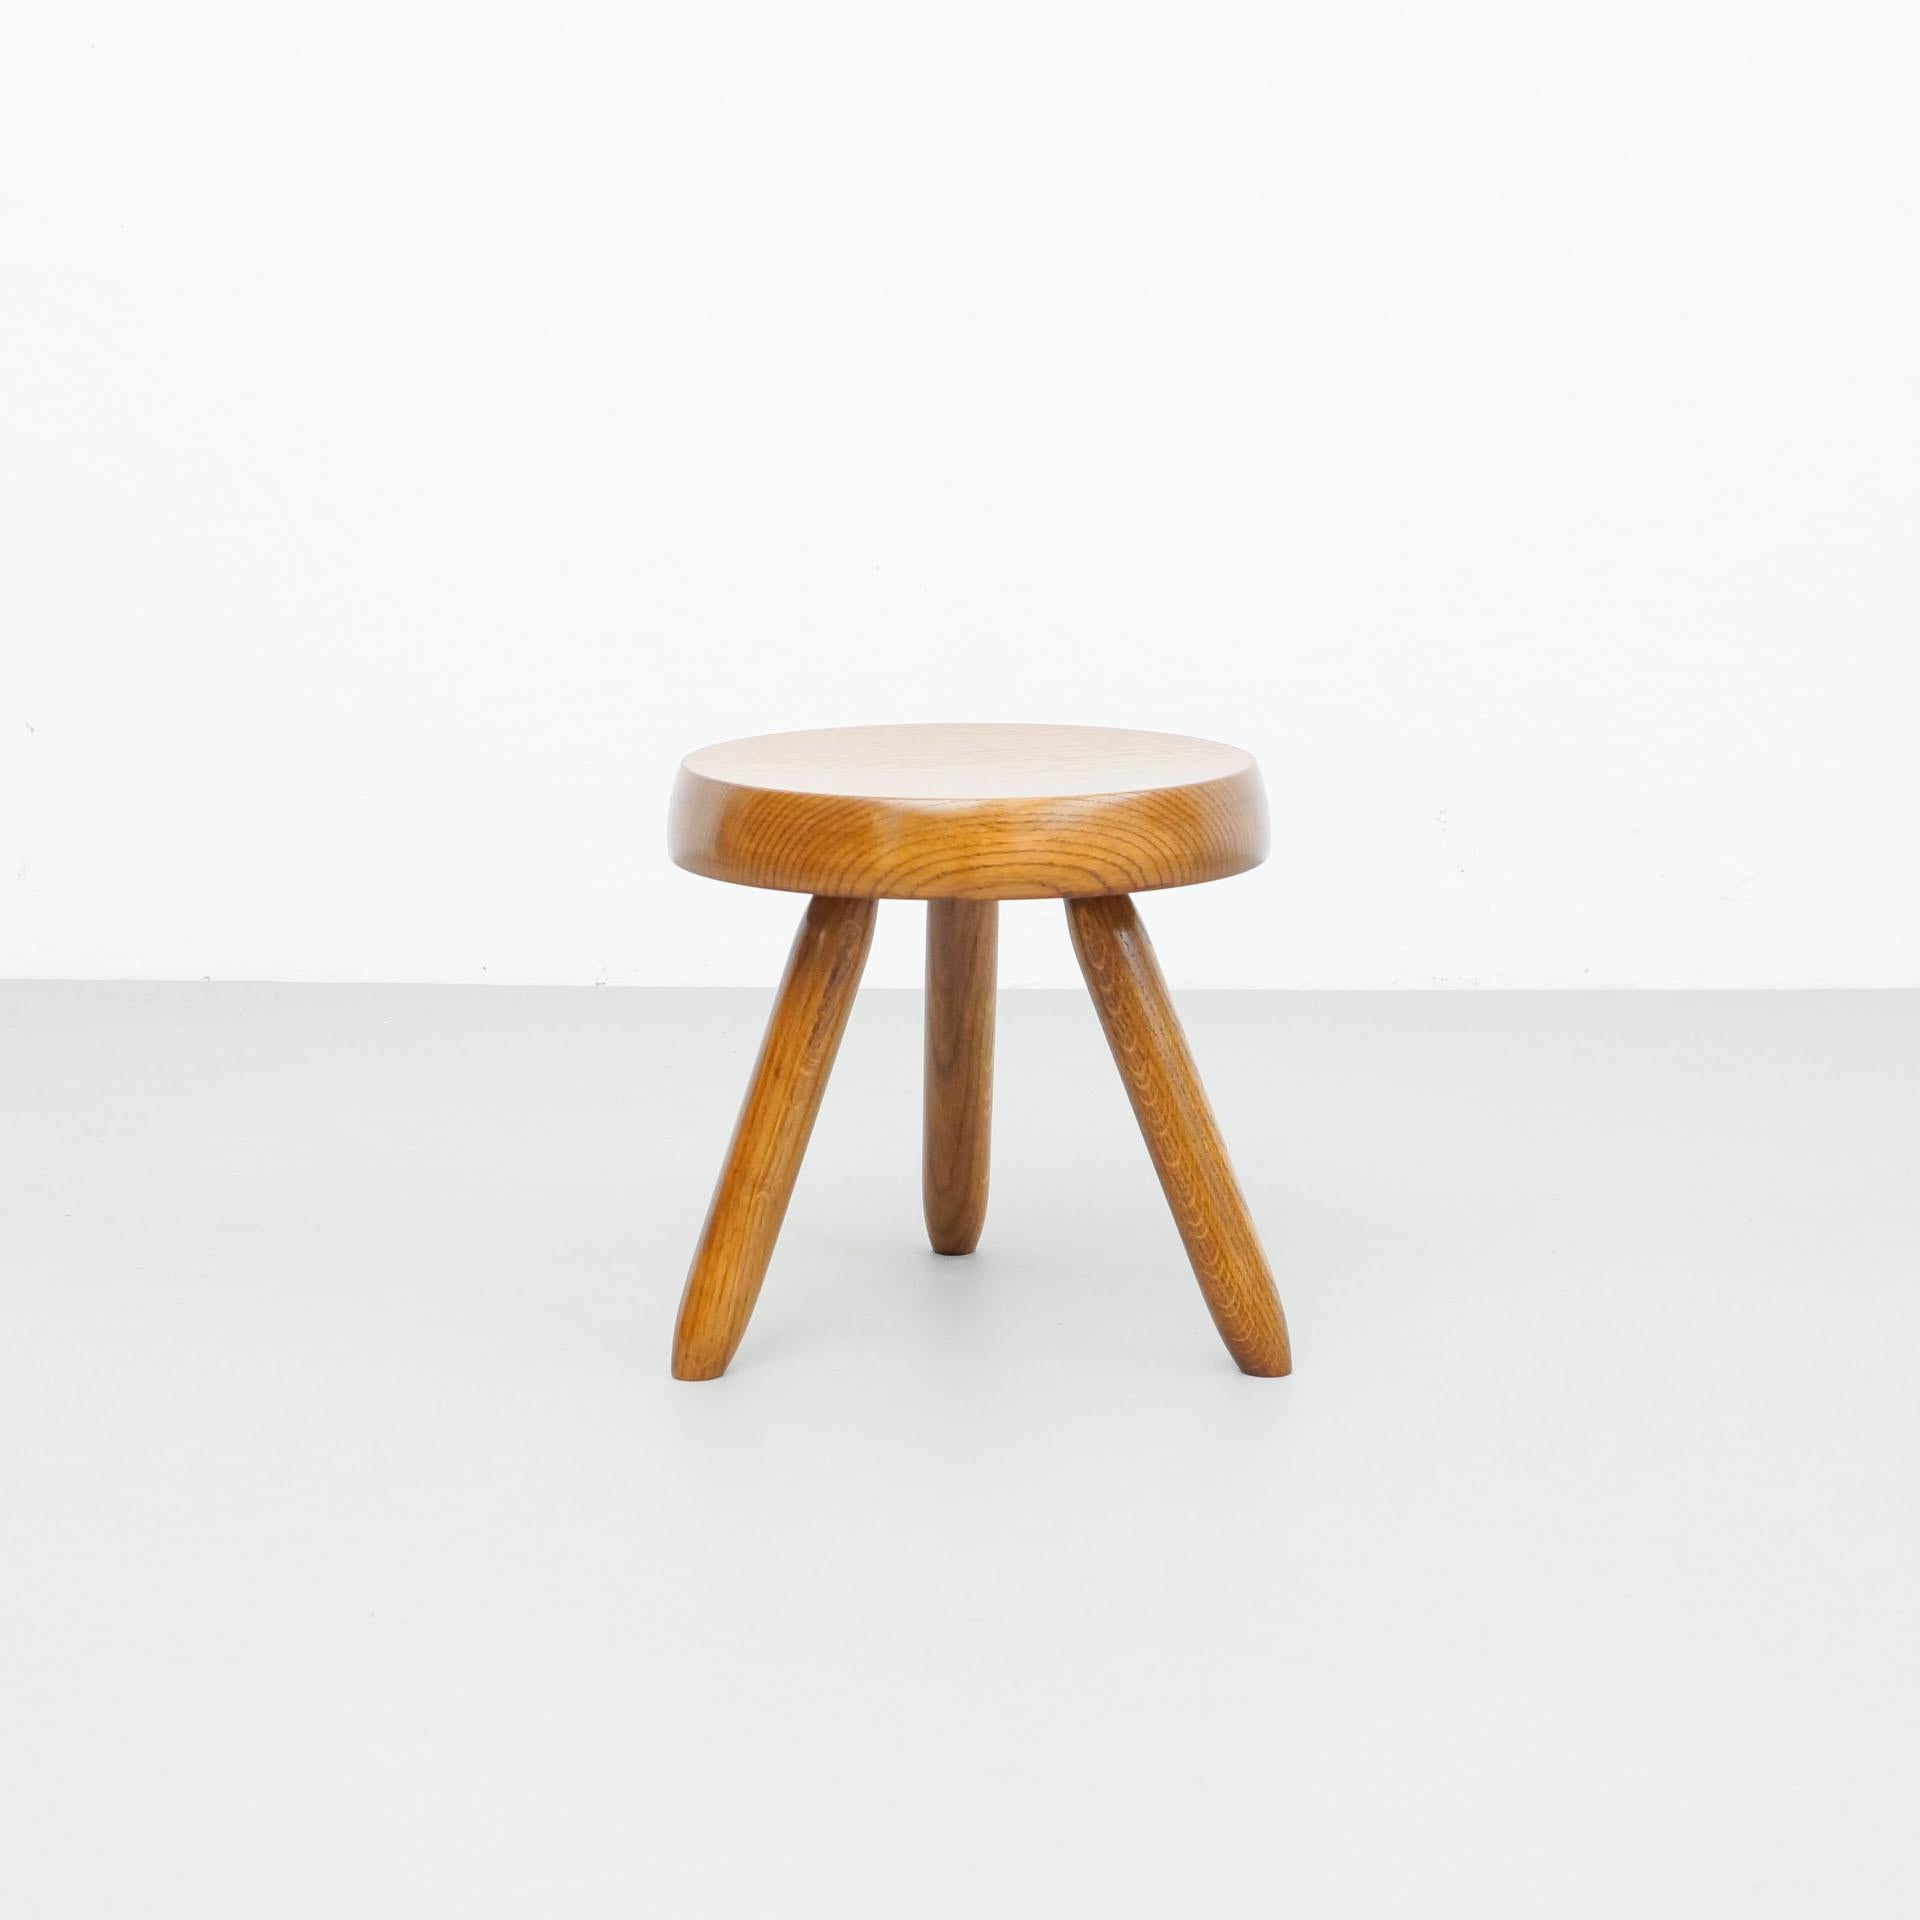 Stool designed in the style of Charlotte Perriand.
Made by unknown manufacturer.

In good original condition, preserving a beautiful patina, with minor wear consistent with age and use. 

Materials:
Wood

Dimensions:
ø 31 cm x H 30.5